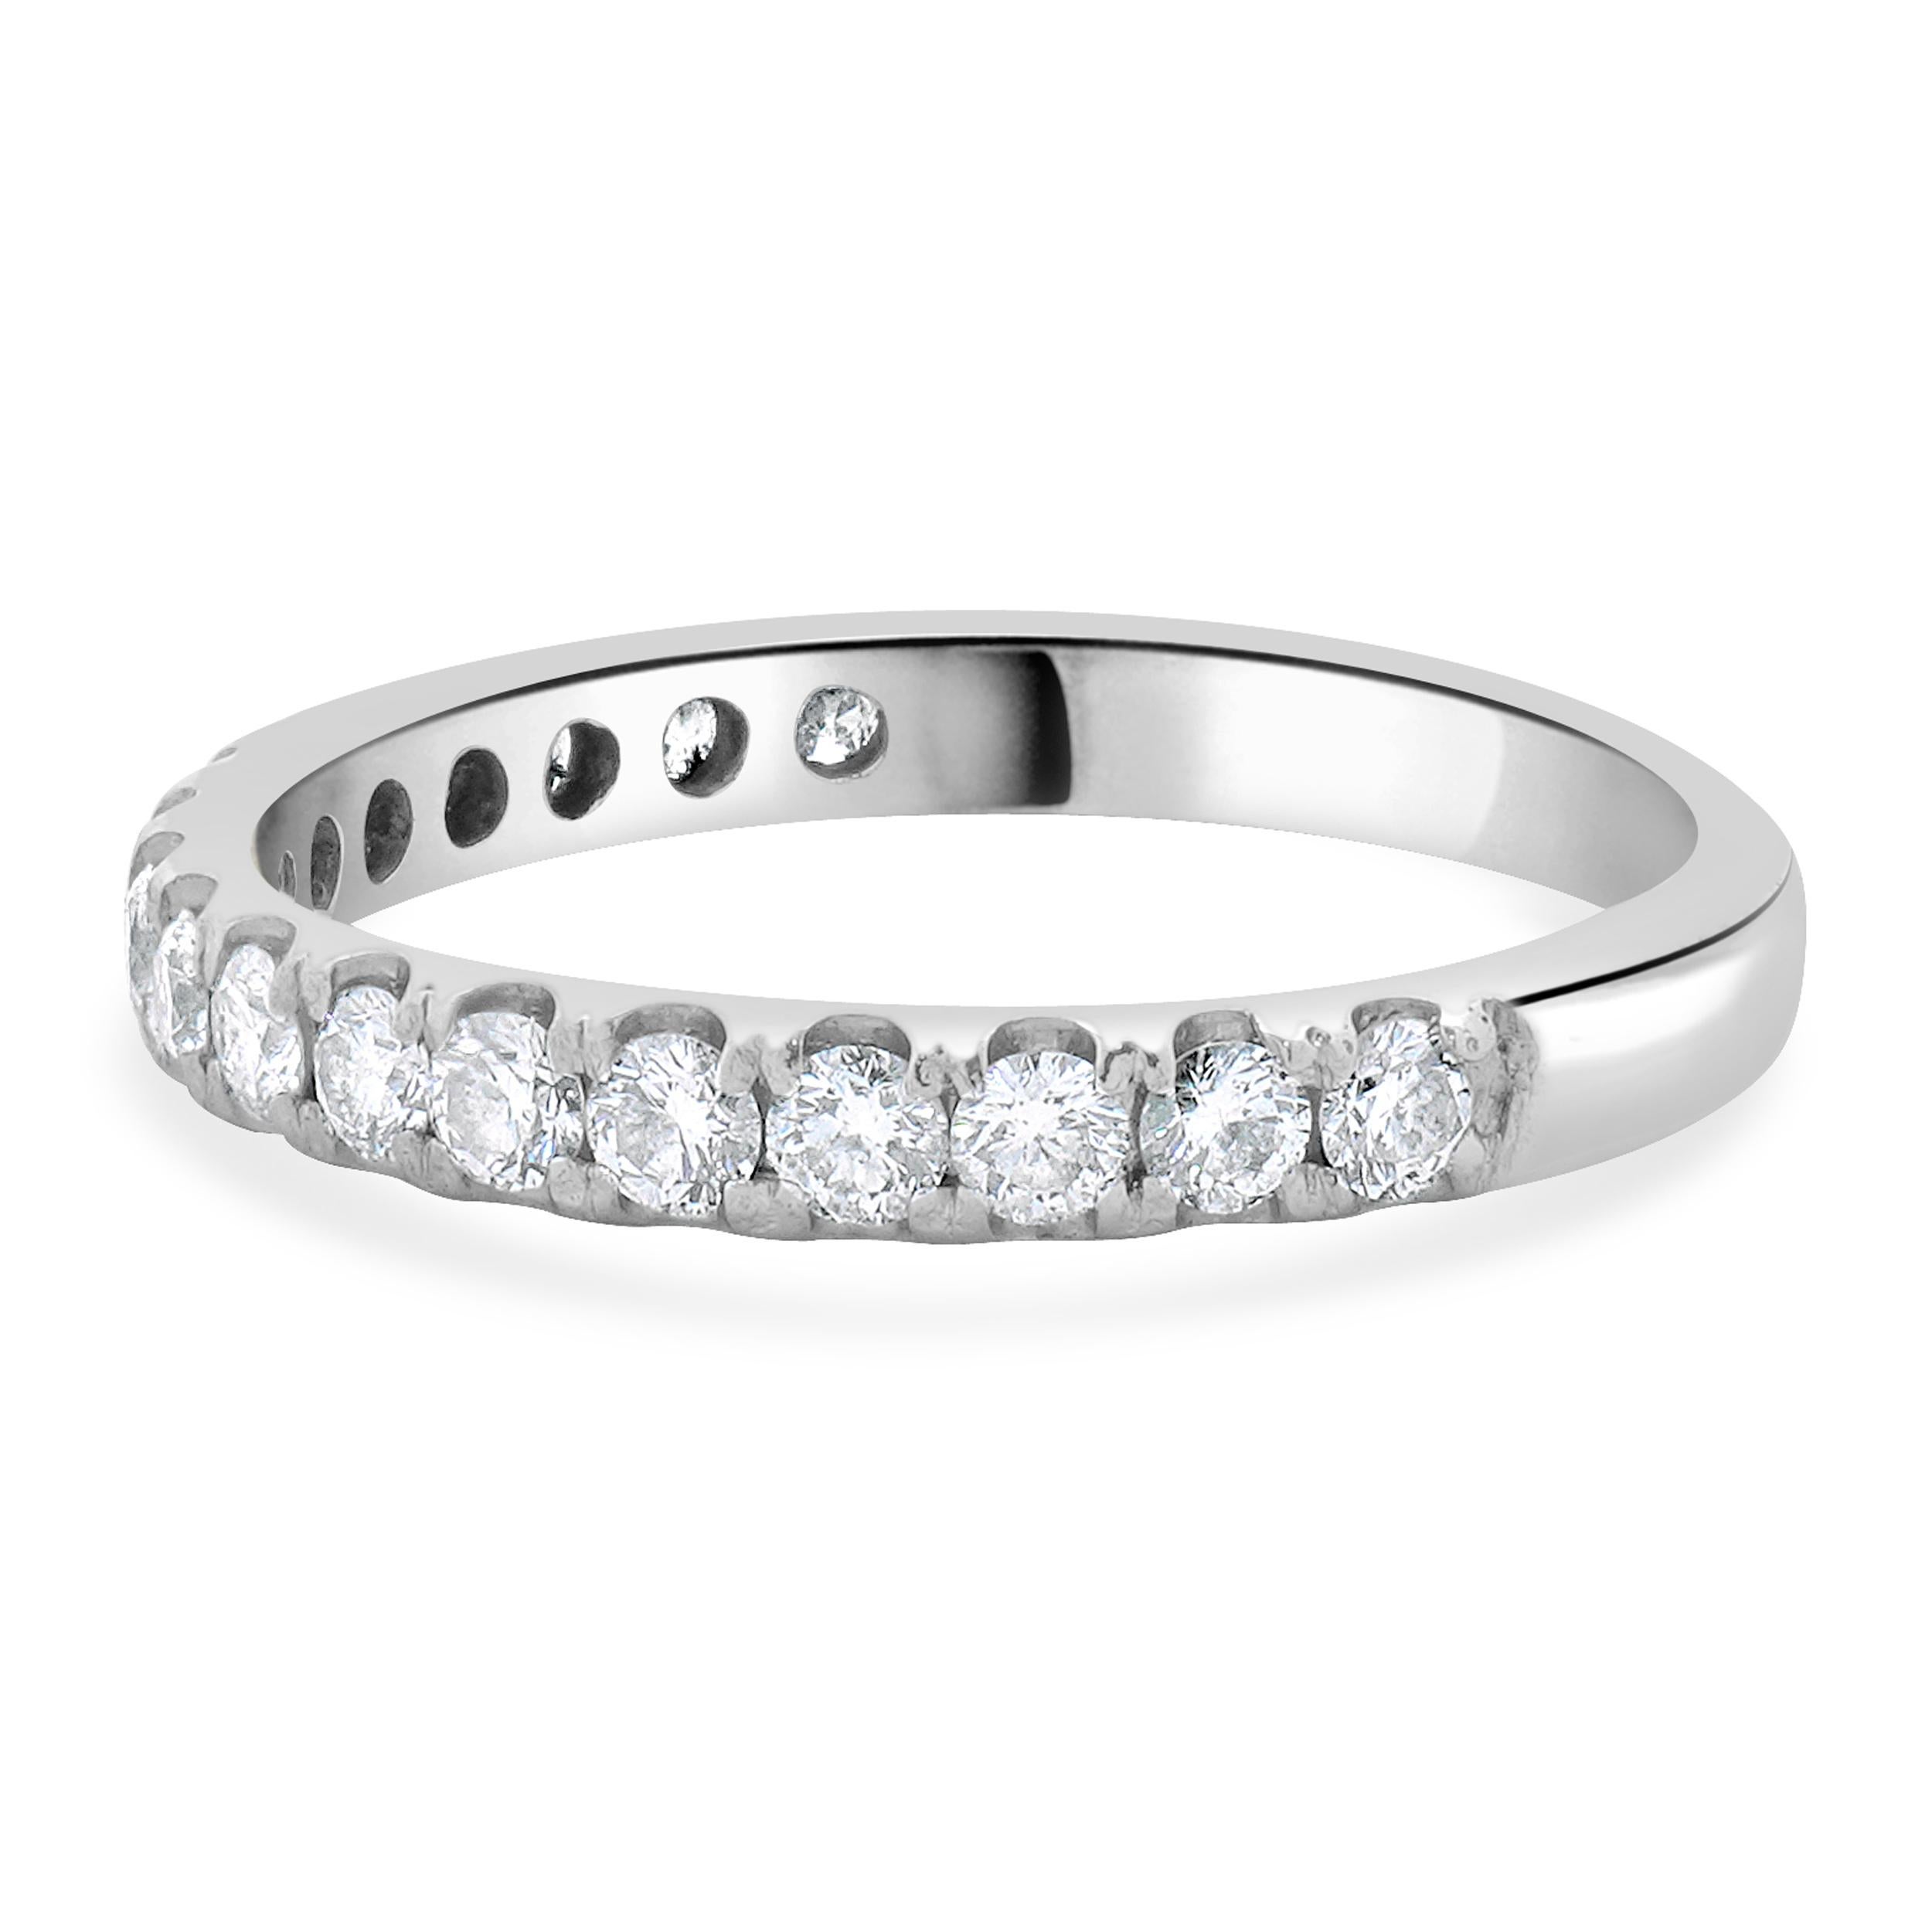 Designer: custom
Material: 14K white gold
Diamond: 17 round brilliant cut = 0.45cttw
Color: H
Clarity: SI1-2
Size: 5 complimentary sizing available 
Weight: 1.95 grams
